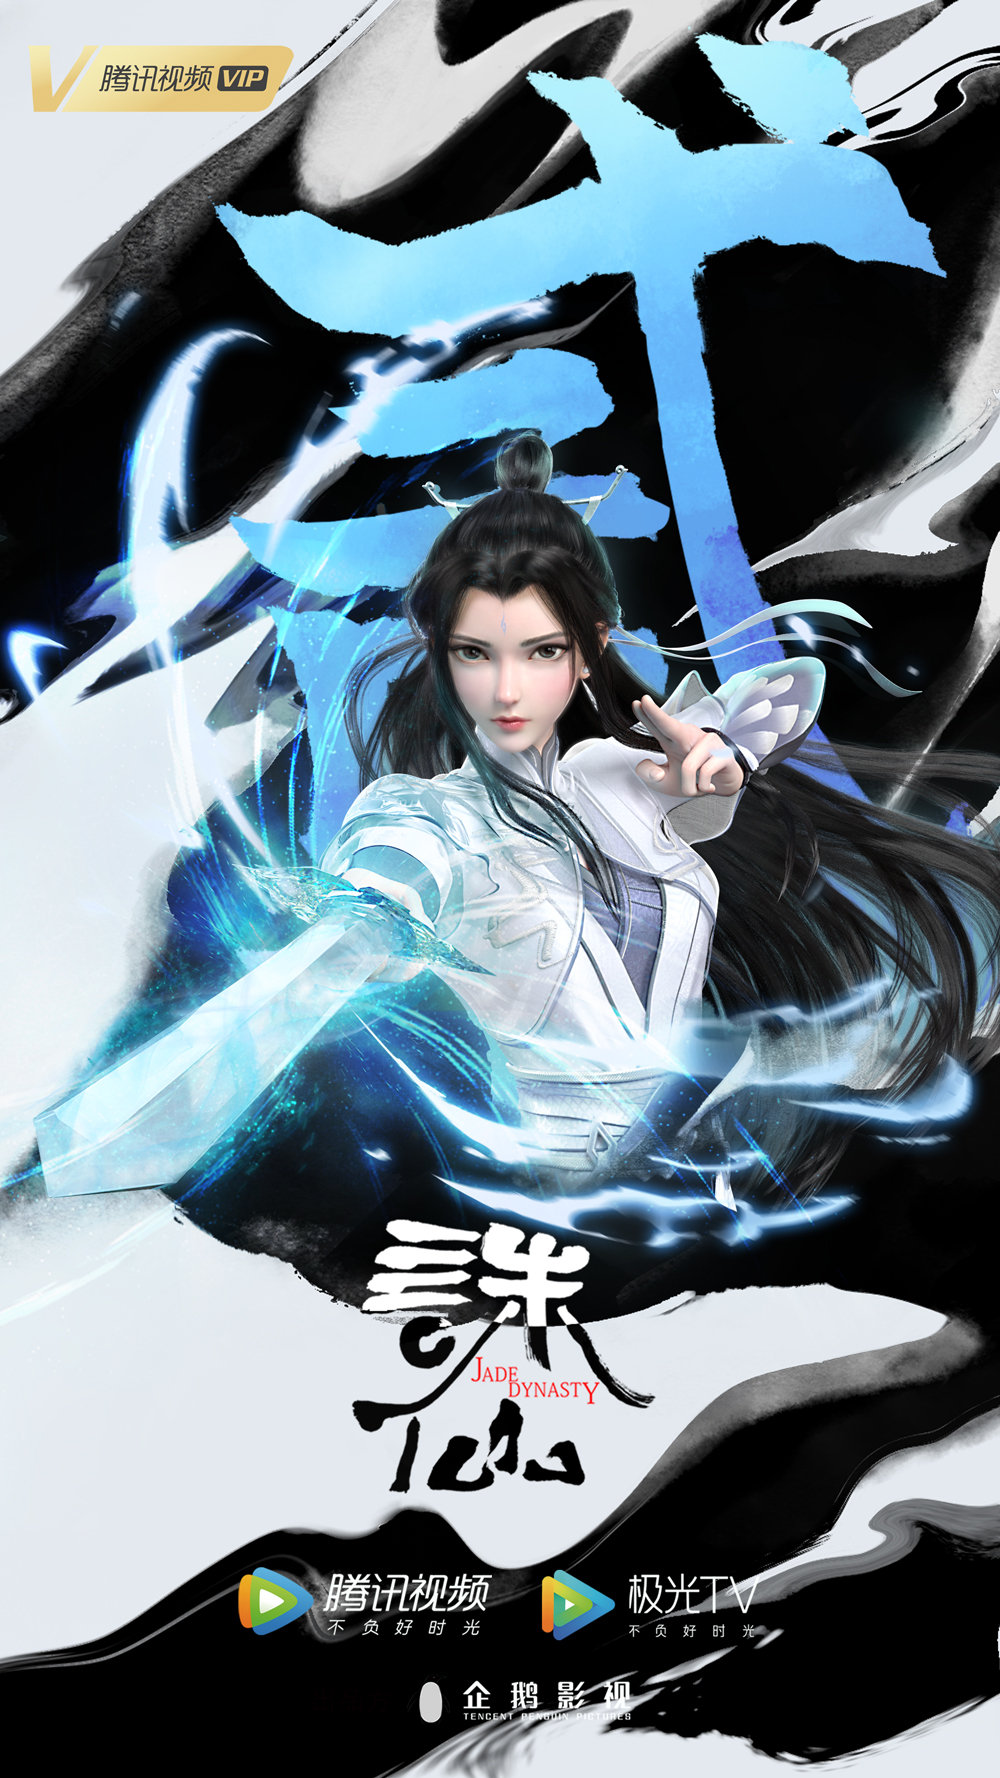 Jade Dynasty character posters 